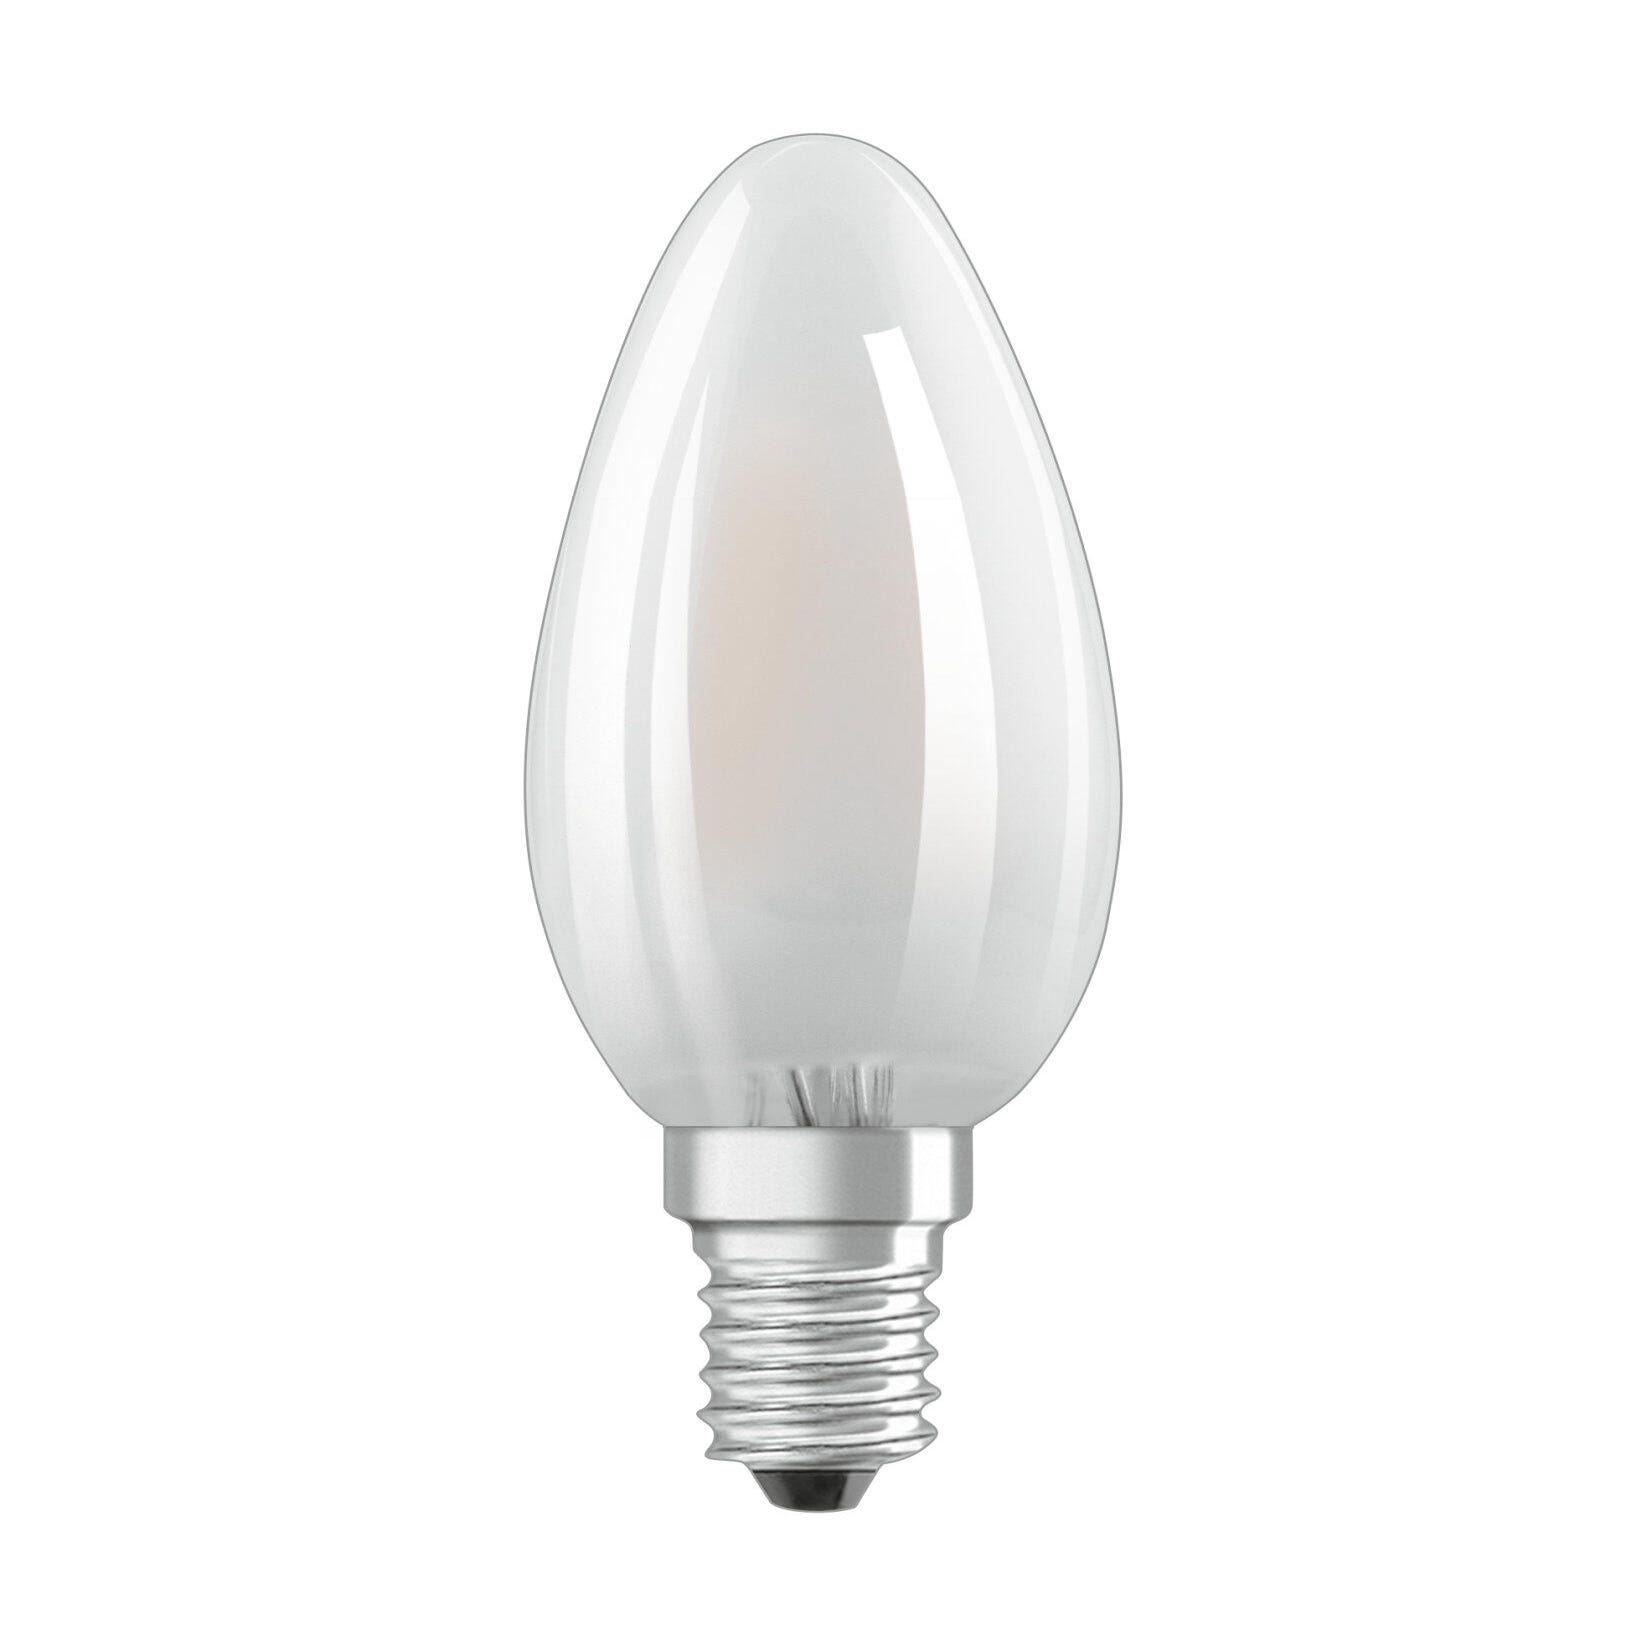 Ampoule led, flamme E14, 470lm = 40W, blanc chaud, dimmable, OSRAM